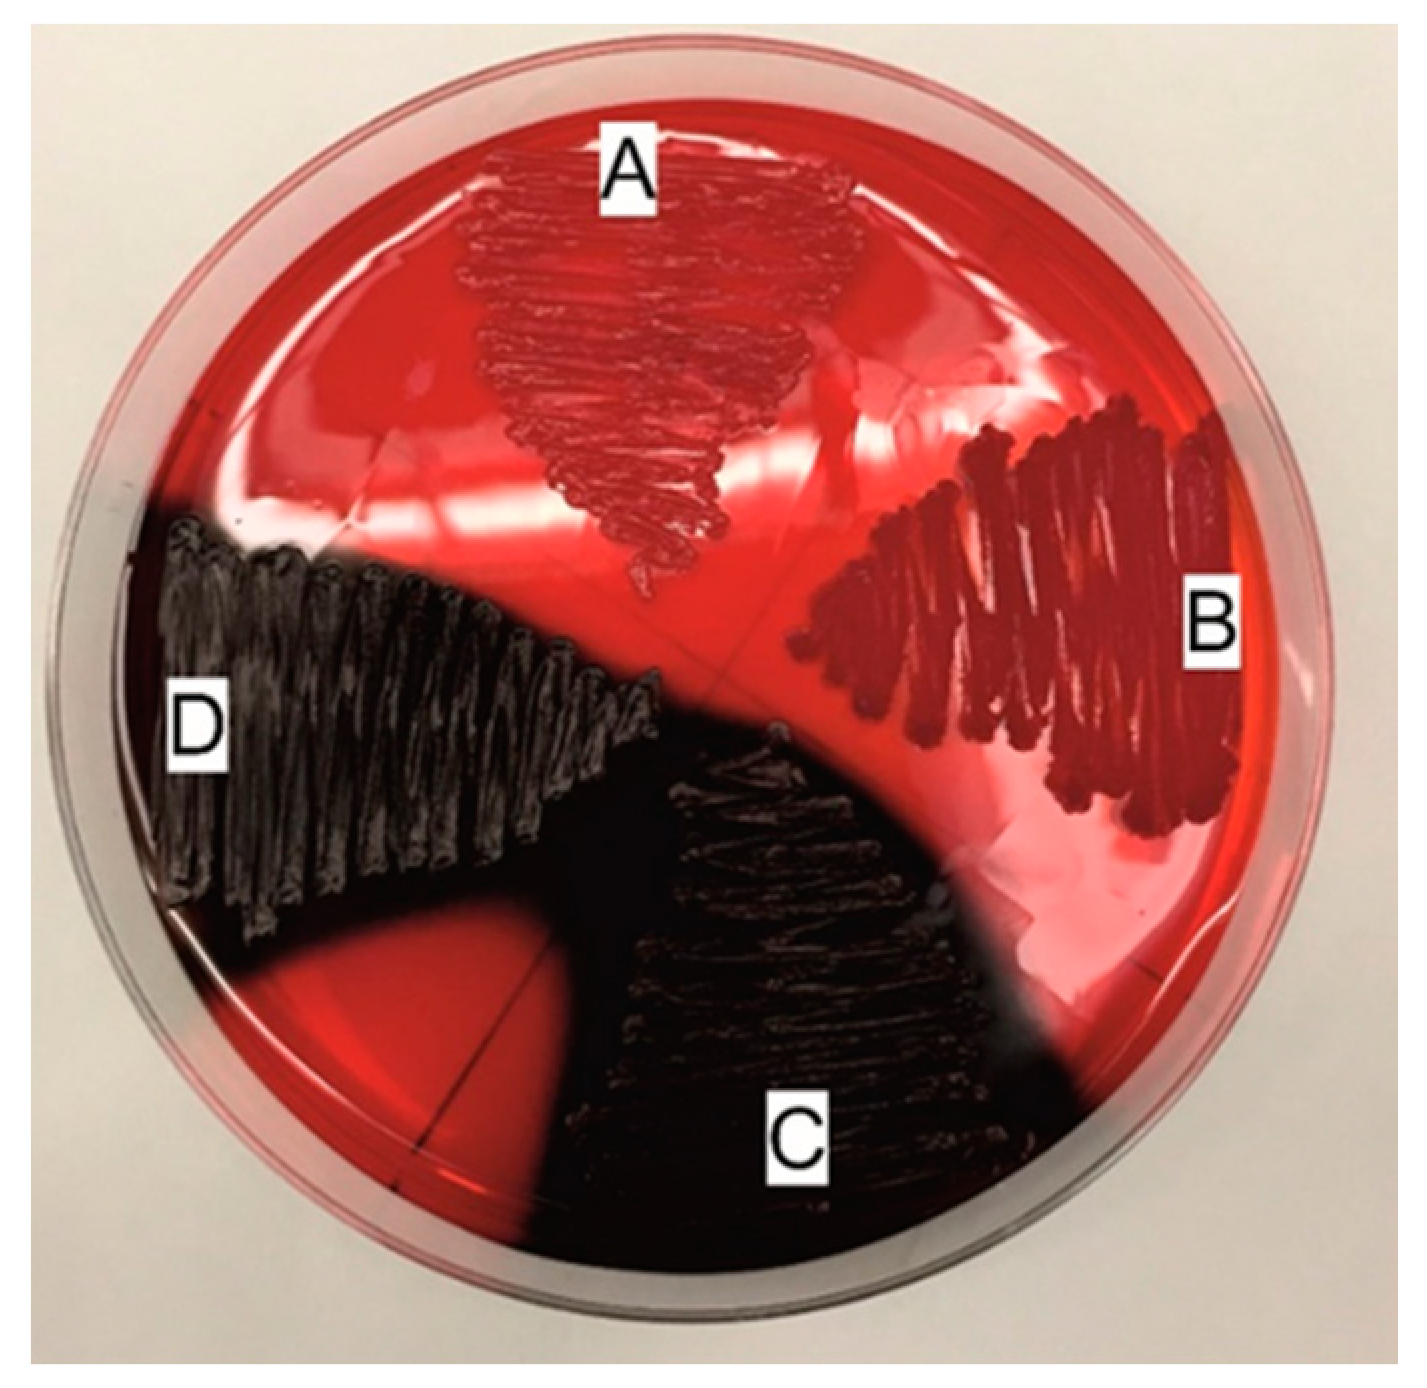 svovl Frastøde Skygge Pathogens | Free Full-Text | Evaluation of Biofilm Formation and Prevalence  of Multidrug-Resistant Strains of Staphylococcus epidermidis Isolated from  Neonates with Sepsis in Southern Poland